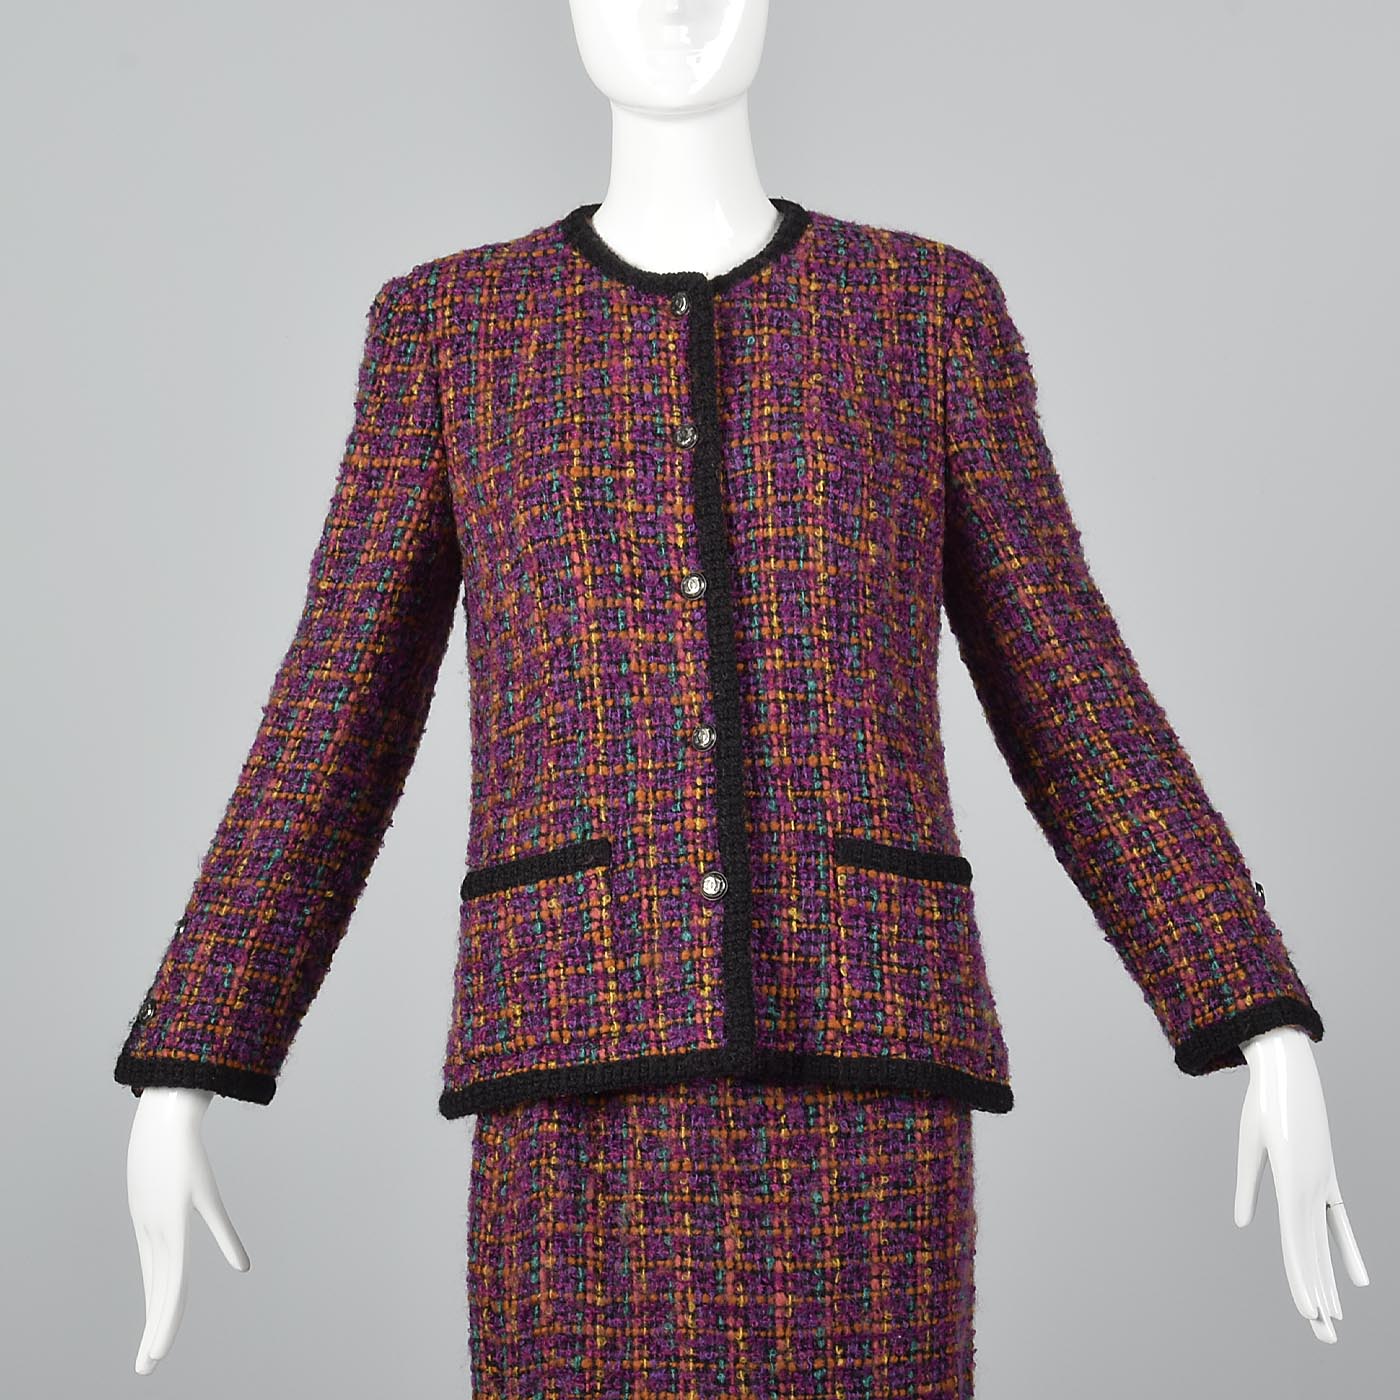 Classic Chanel Pink Tweed Skirt Suit – Style & Salvage